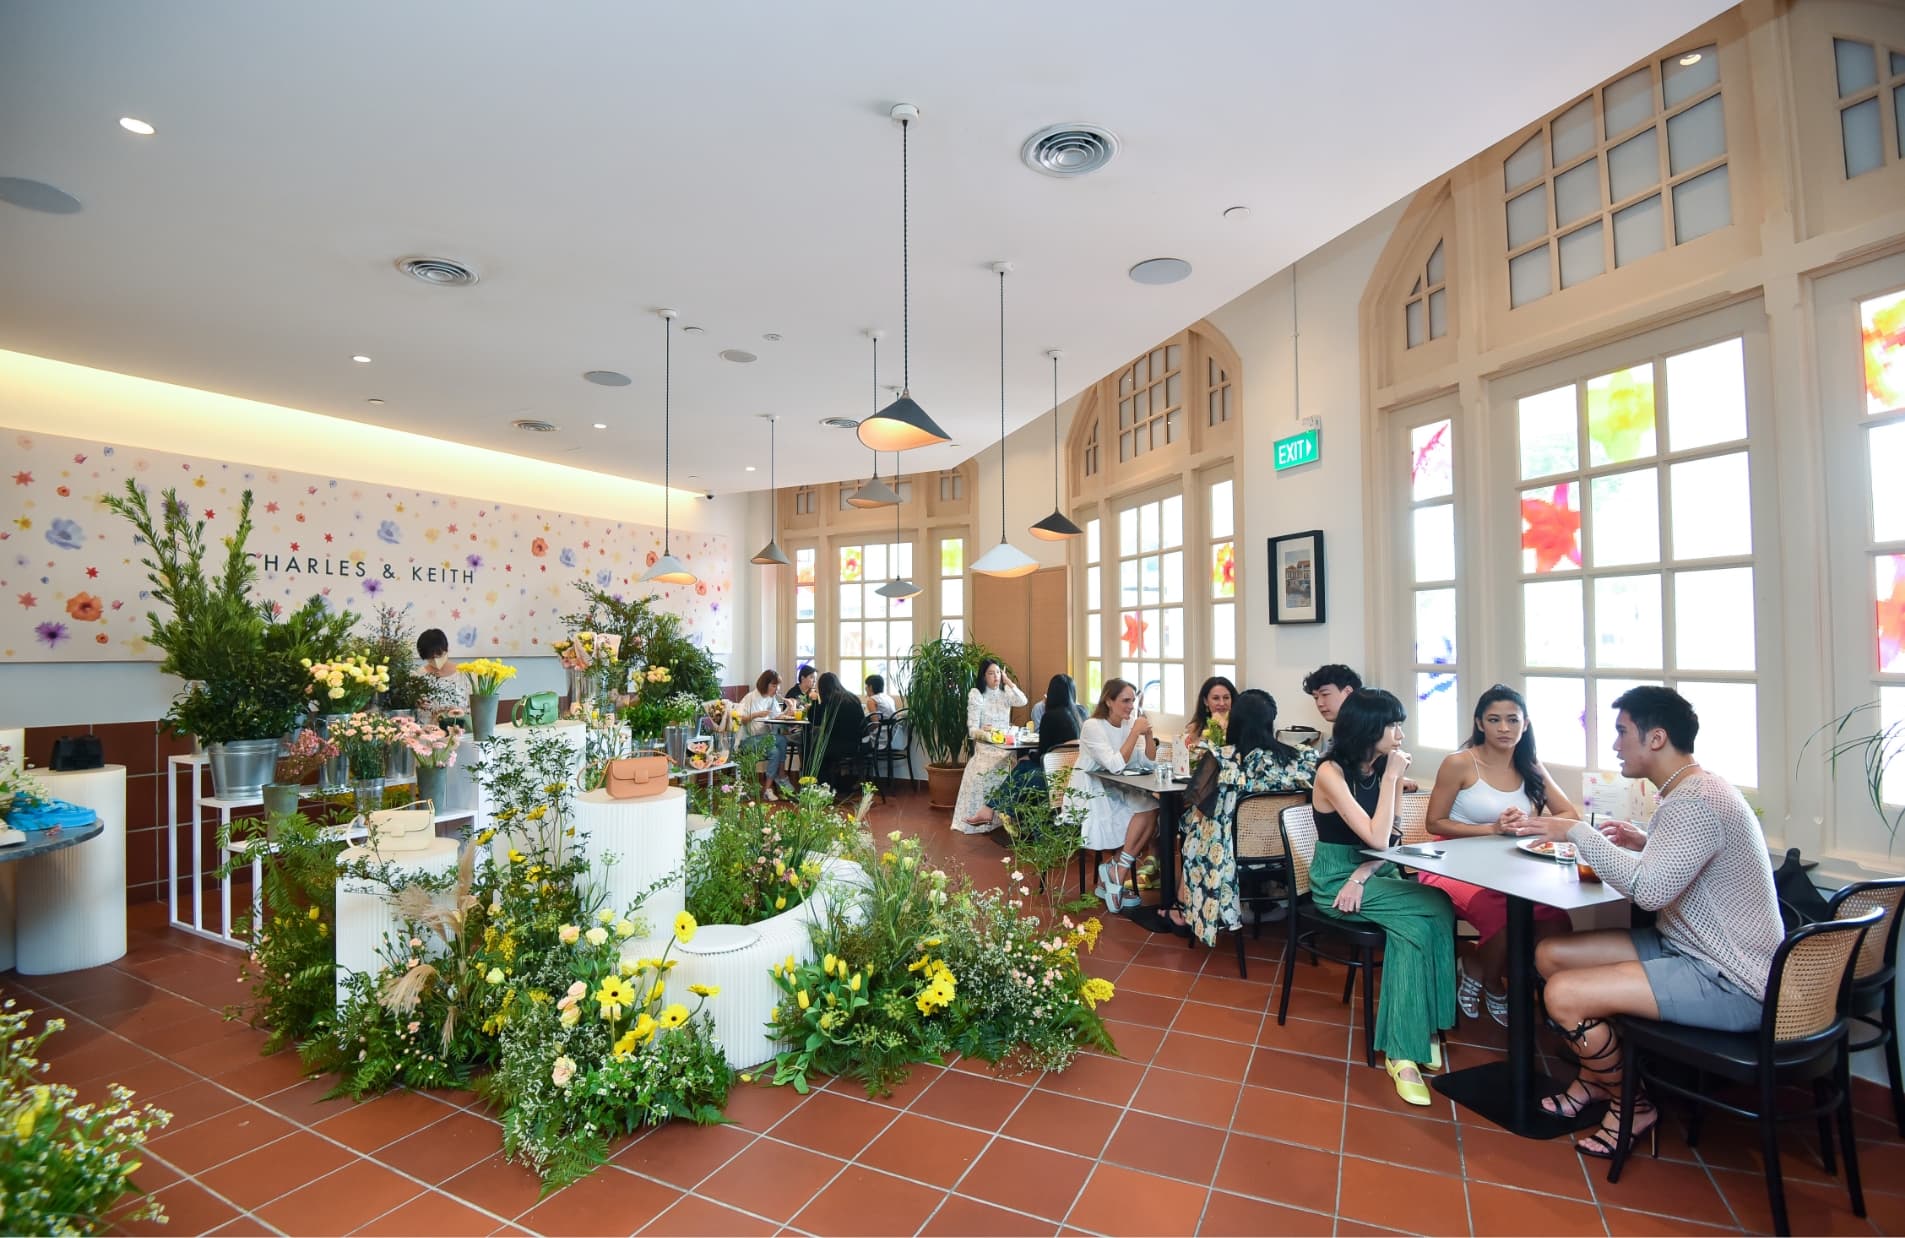 CHARLES & KEITH x Gather café ‘Blooming Spring’ pop-up event in Singapore (interior)